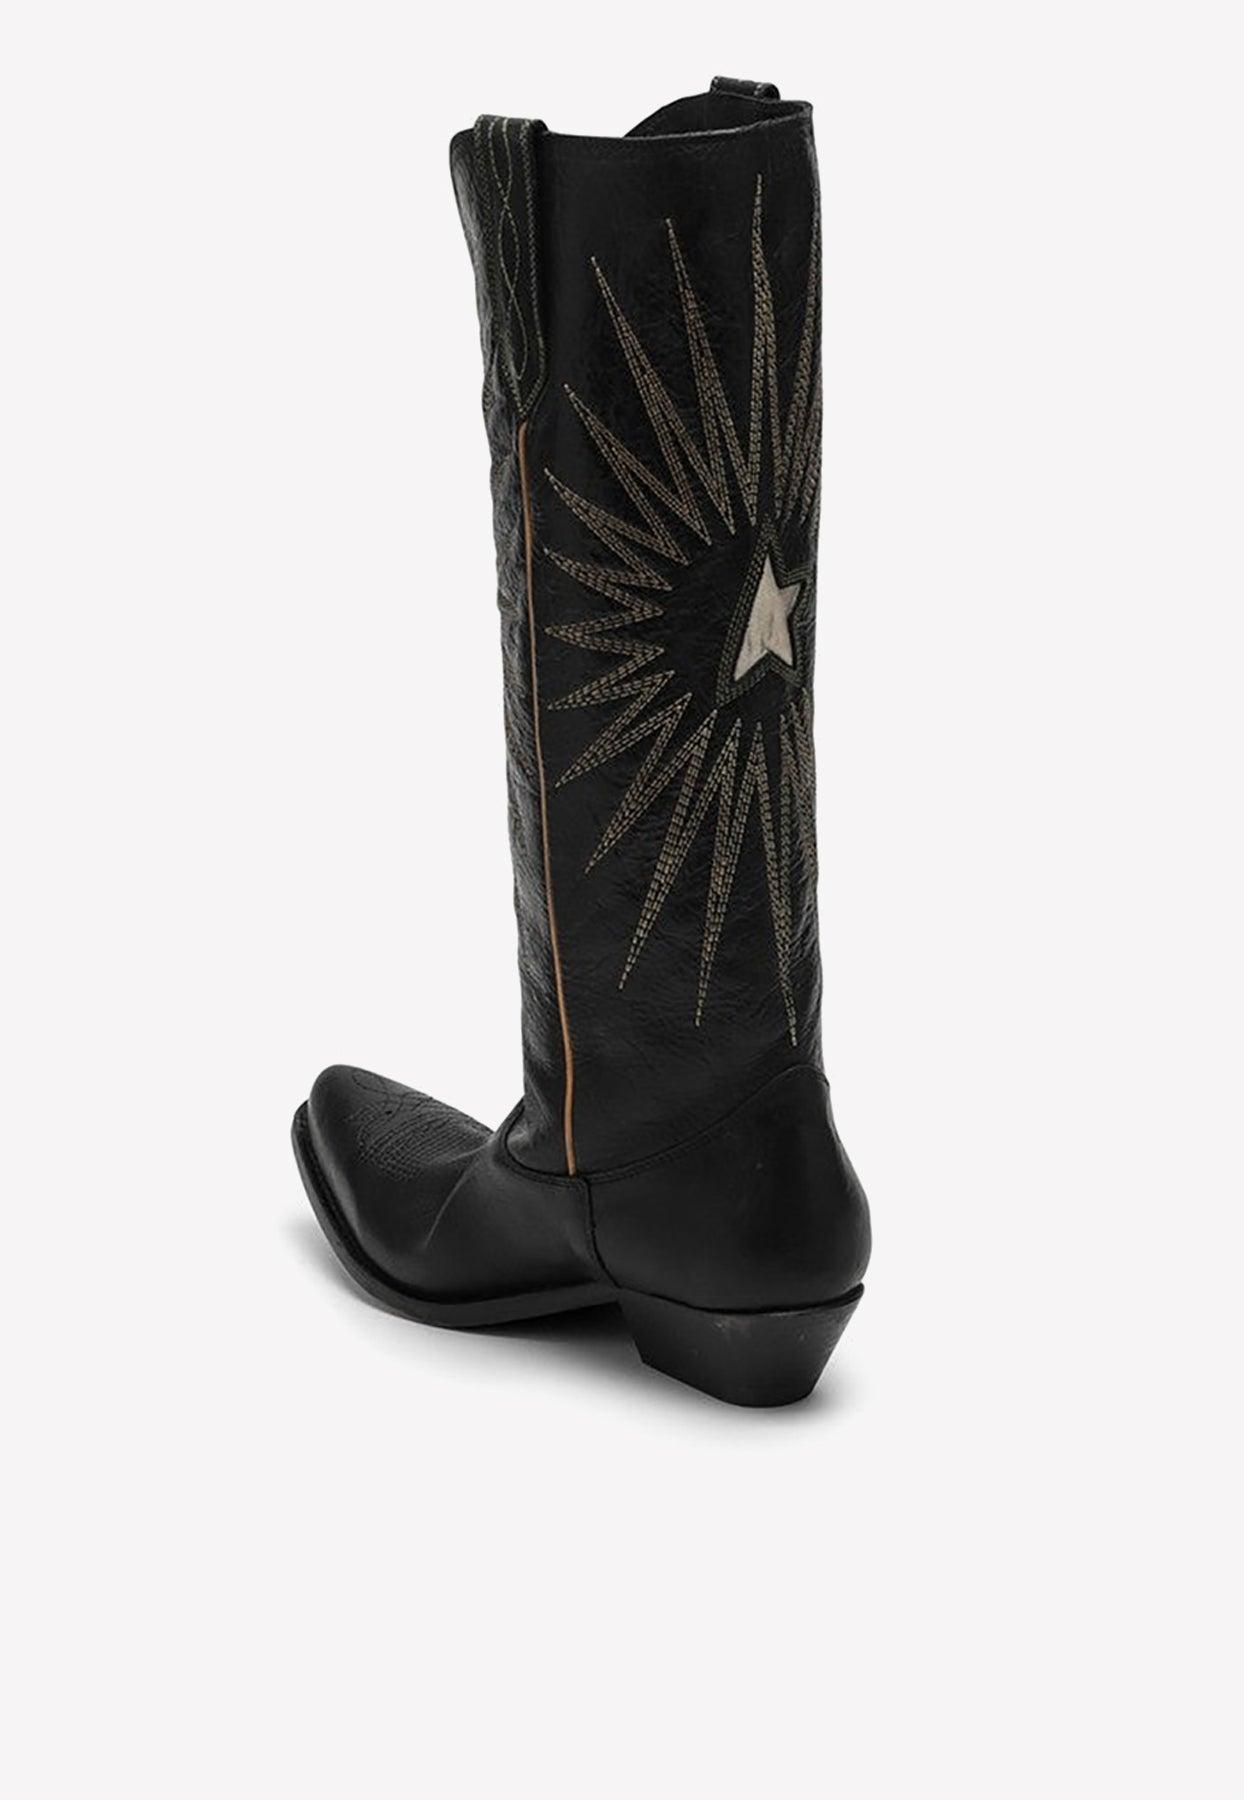 Golden Goose Wish Star Leather Cowboy Boots in Black | Lyst